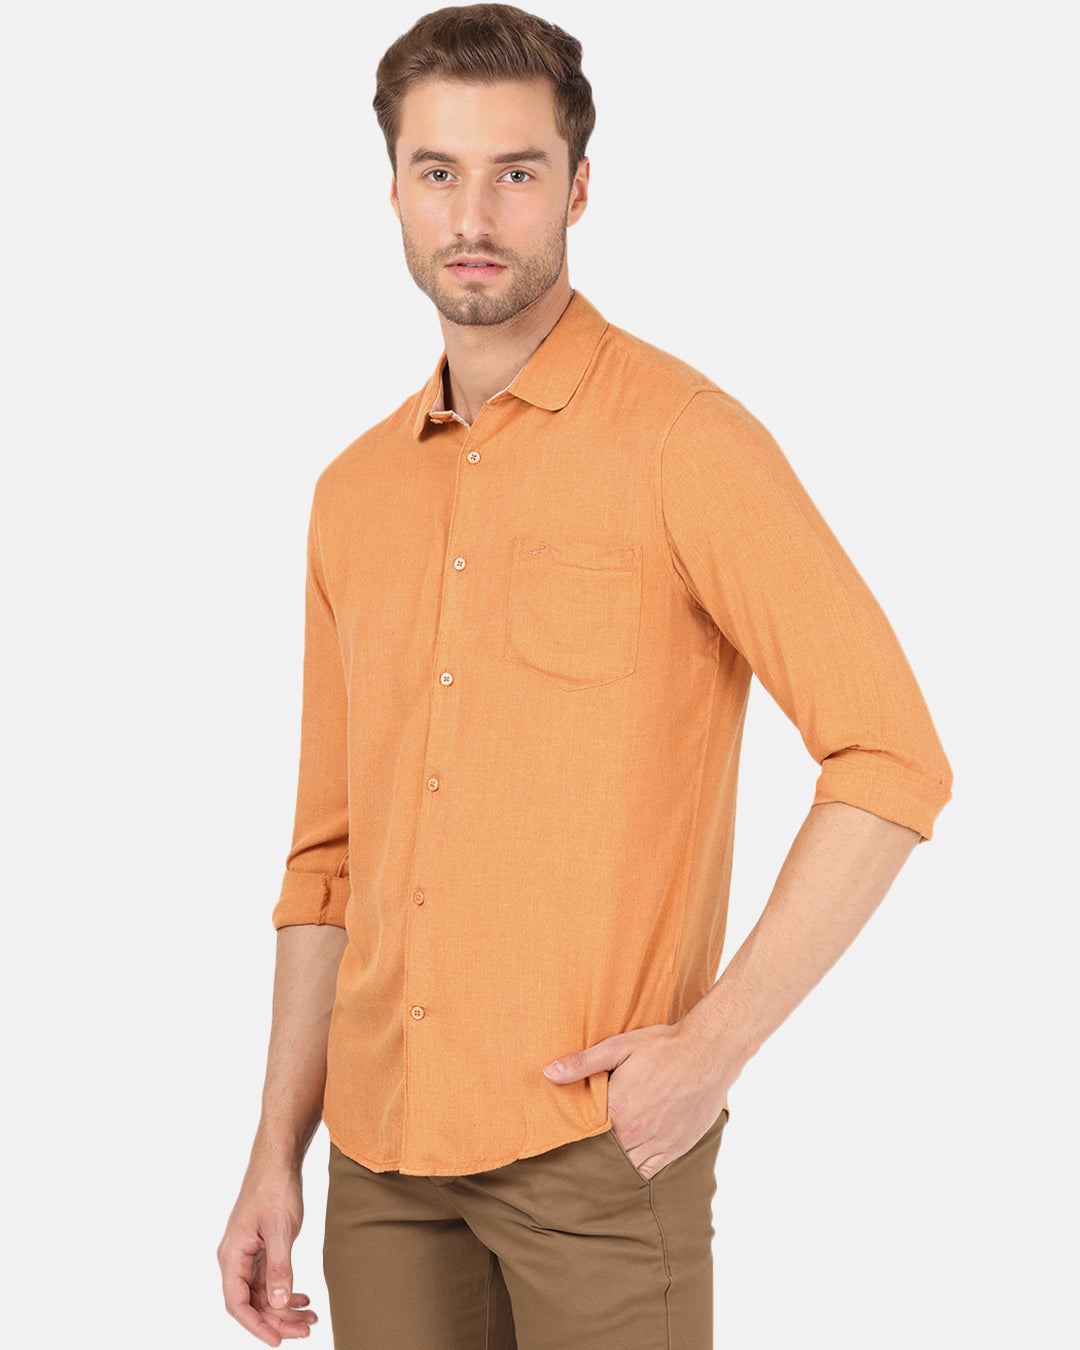 Crocodile Casual Full Sleeve Comfort Fit Solid Orange with Collar Shirt for Men